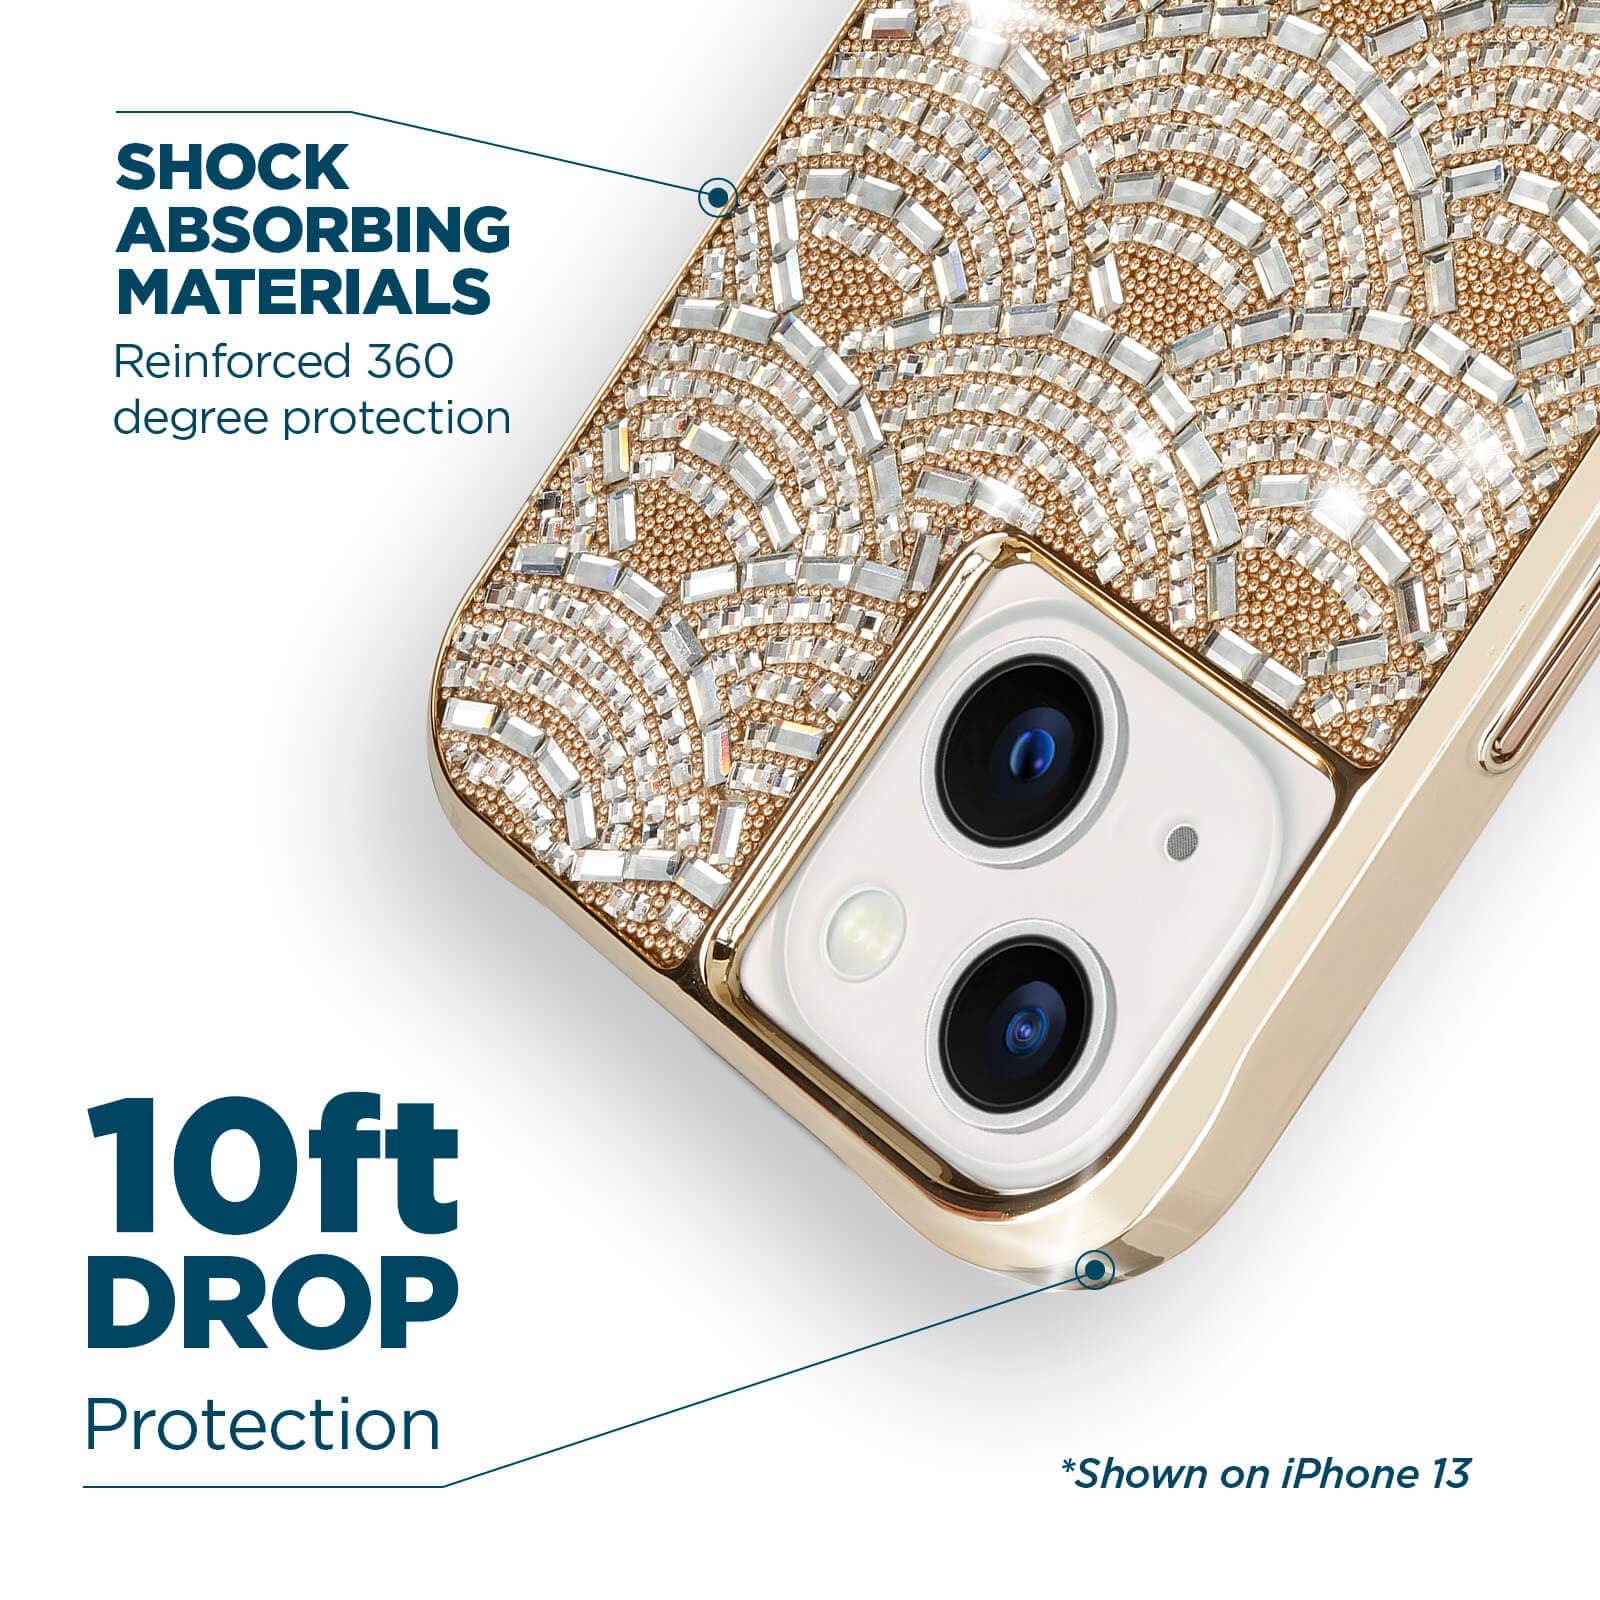 Shock absorbing materials reinforced 360 degree protection. 10ft drop protection. Shown on iPhone 13.color::Brilliance Chandelier